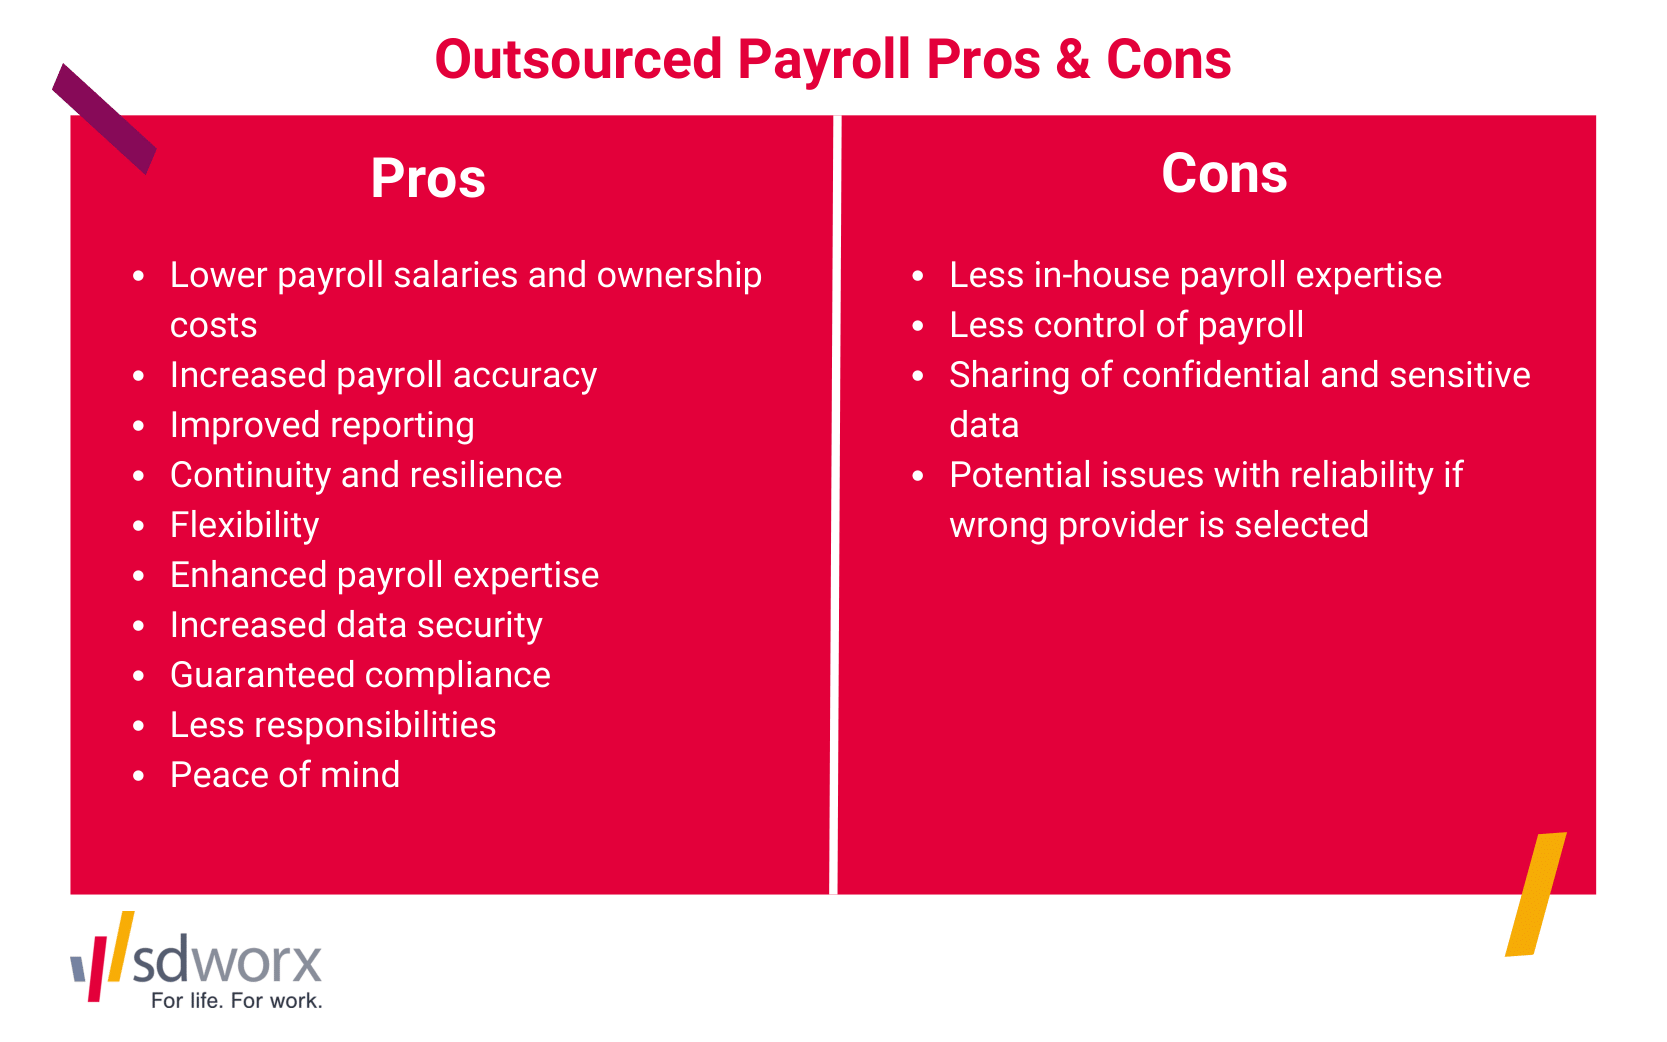 pros and cons of outsourced payroll